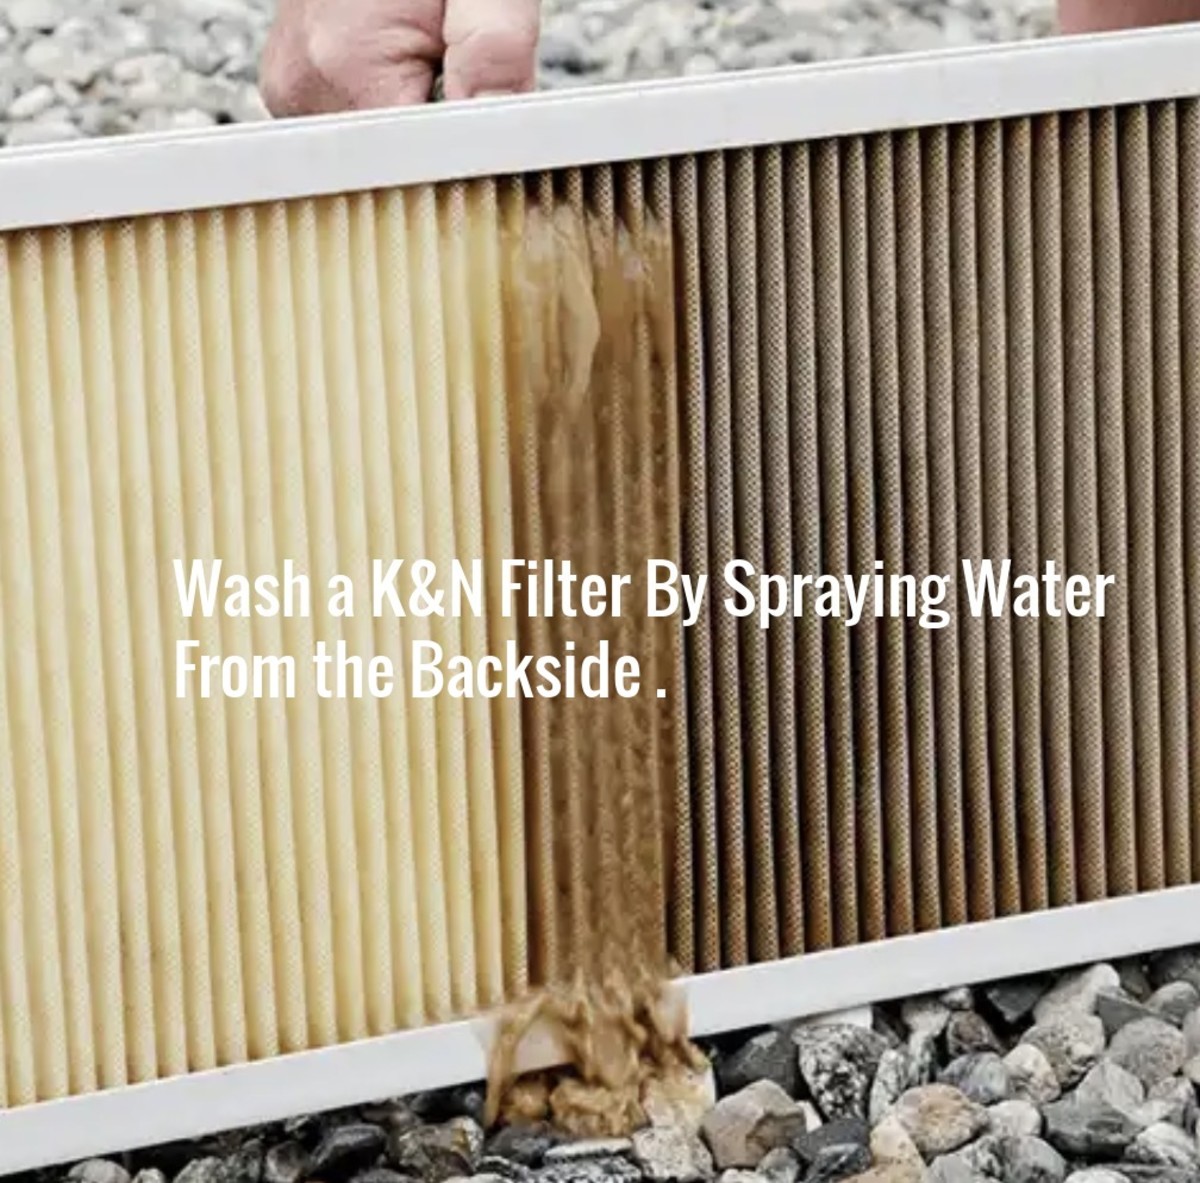 Ordinarily you should not let your washable HVAC filter get this dirty since it will negatively impact air flow.